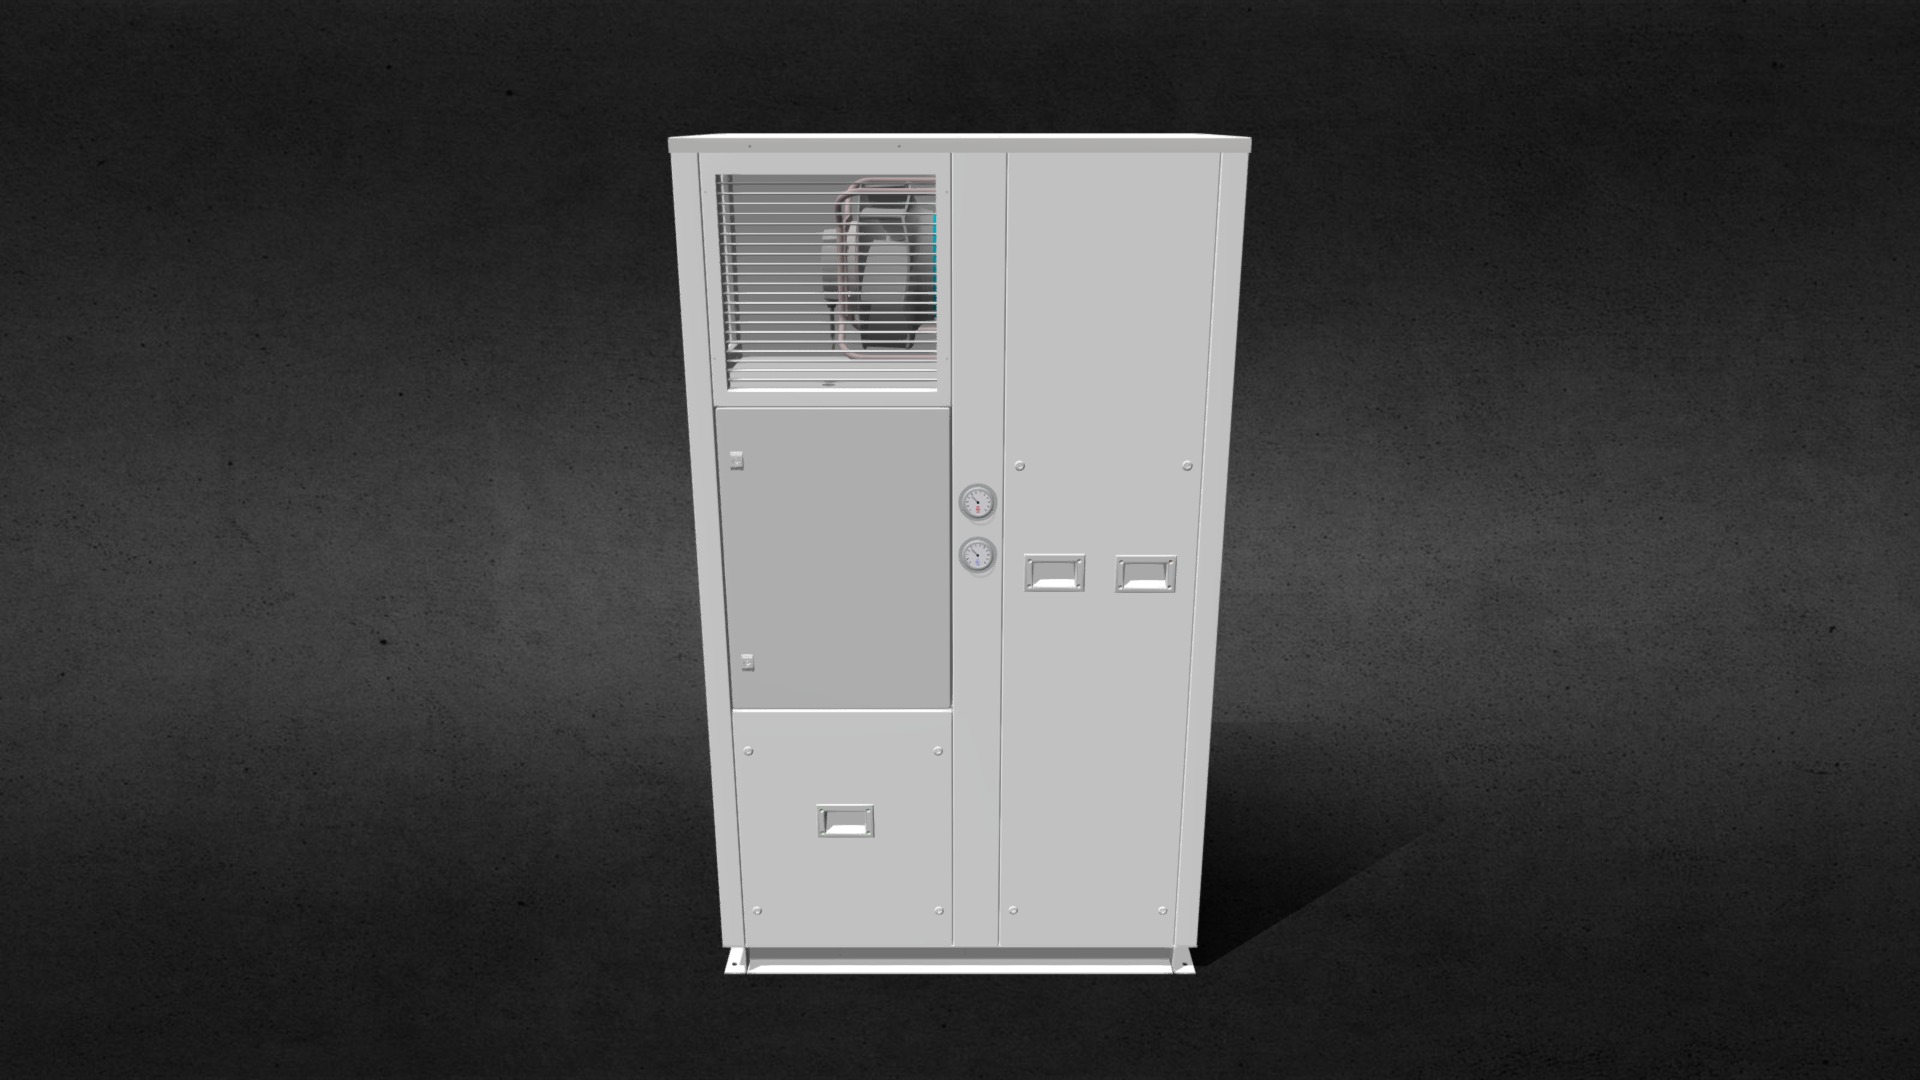 3D model MAC-C70 - This is a 3D model of the MAC-C70. The 3D model is about a white rectangular object with a vent.